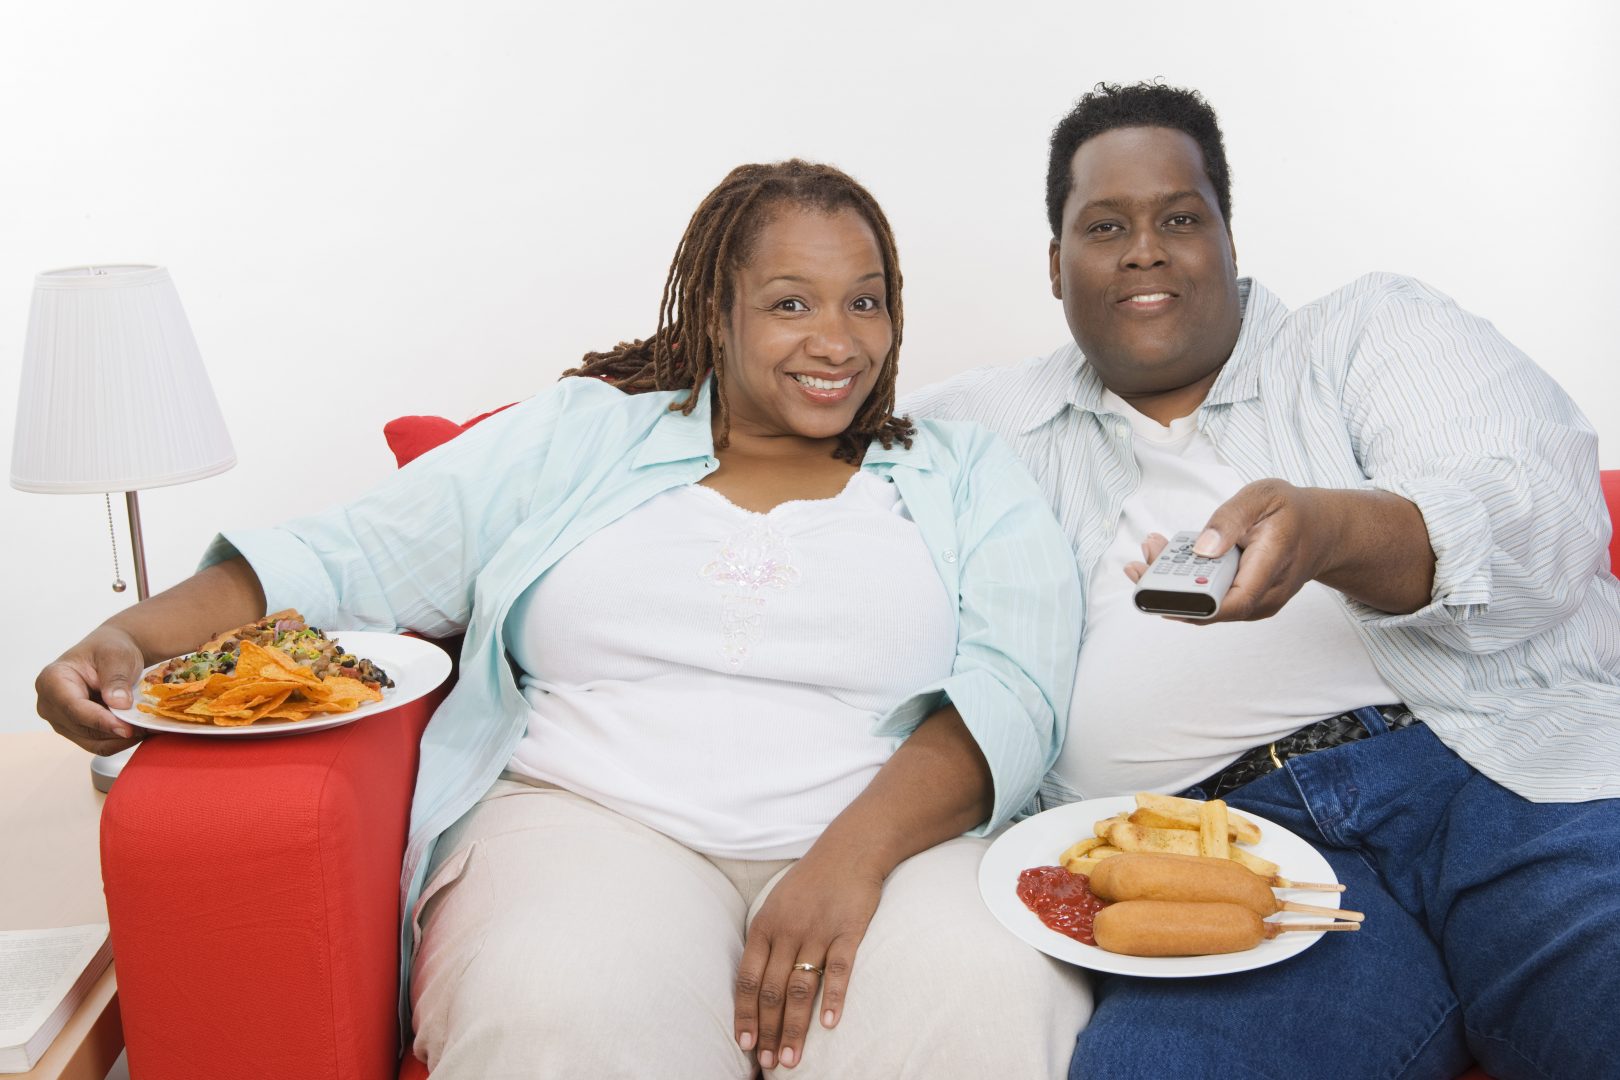 Relation-tips: What if my spouse's unexpected weight gain is a turn-off?